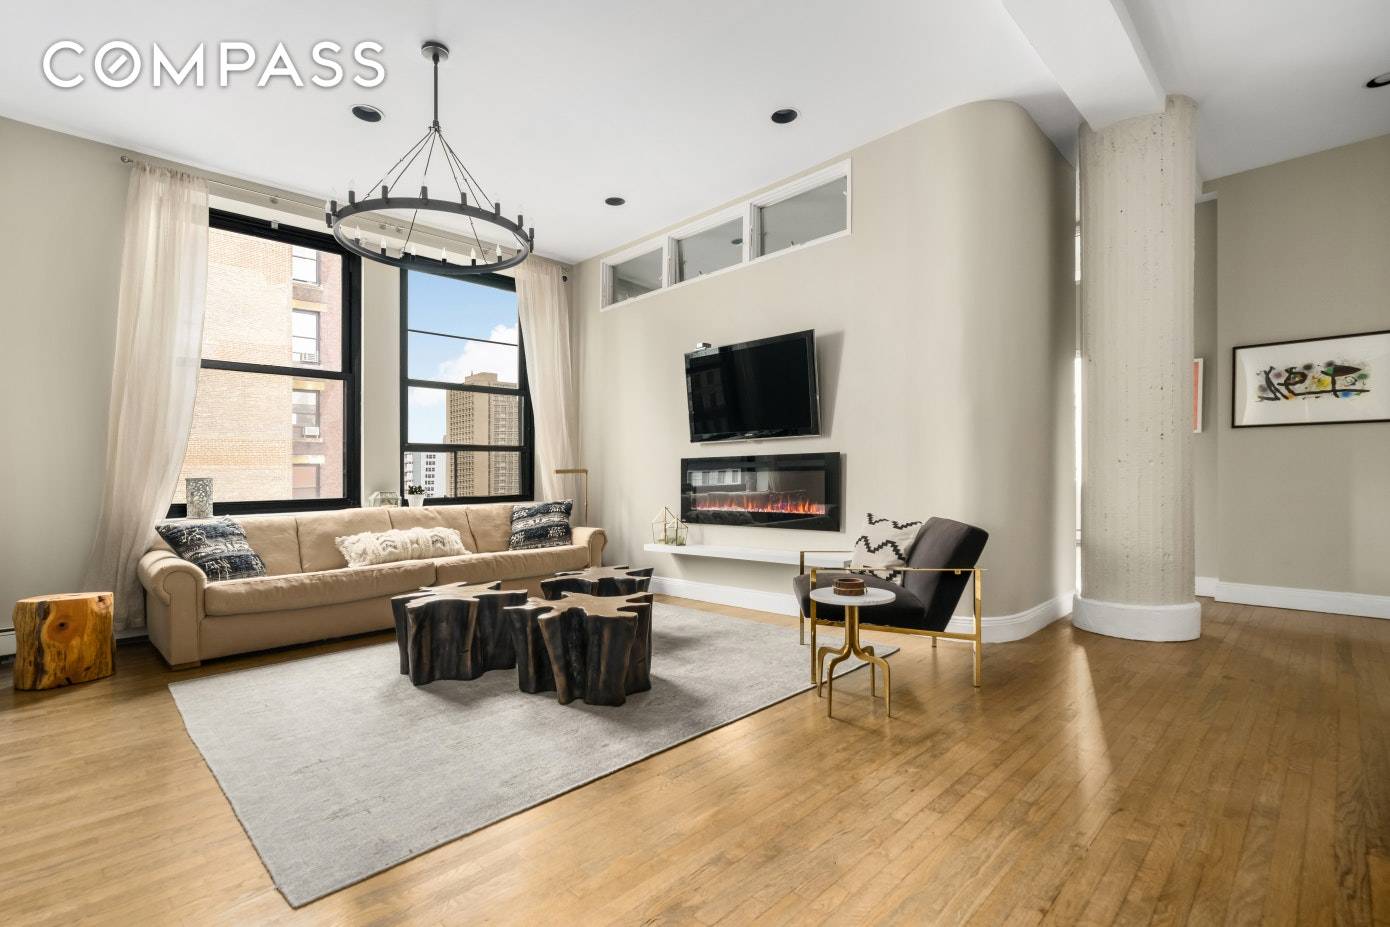 This loft like convertible two bedroom is located in the heart of historic Greenwich Village, boasting a spacious and open floor plan with corner exposures.